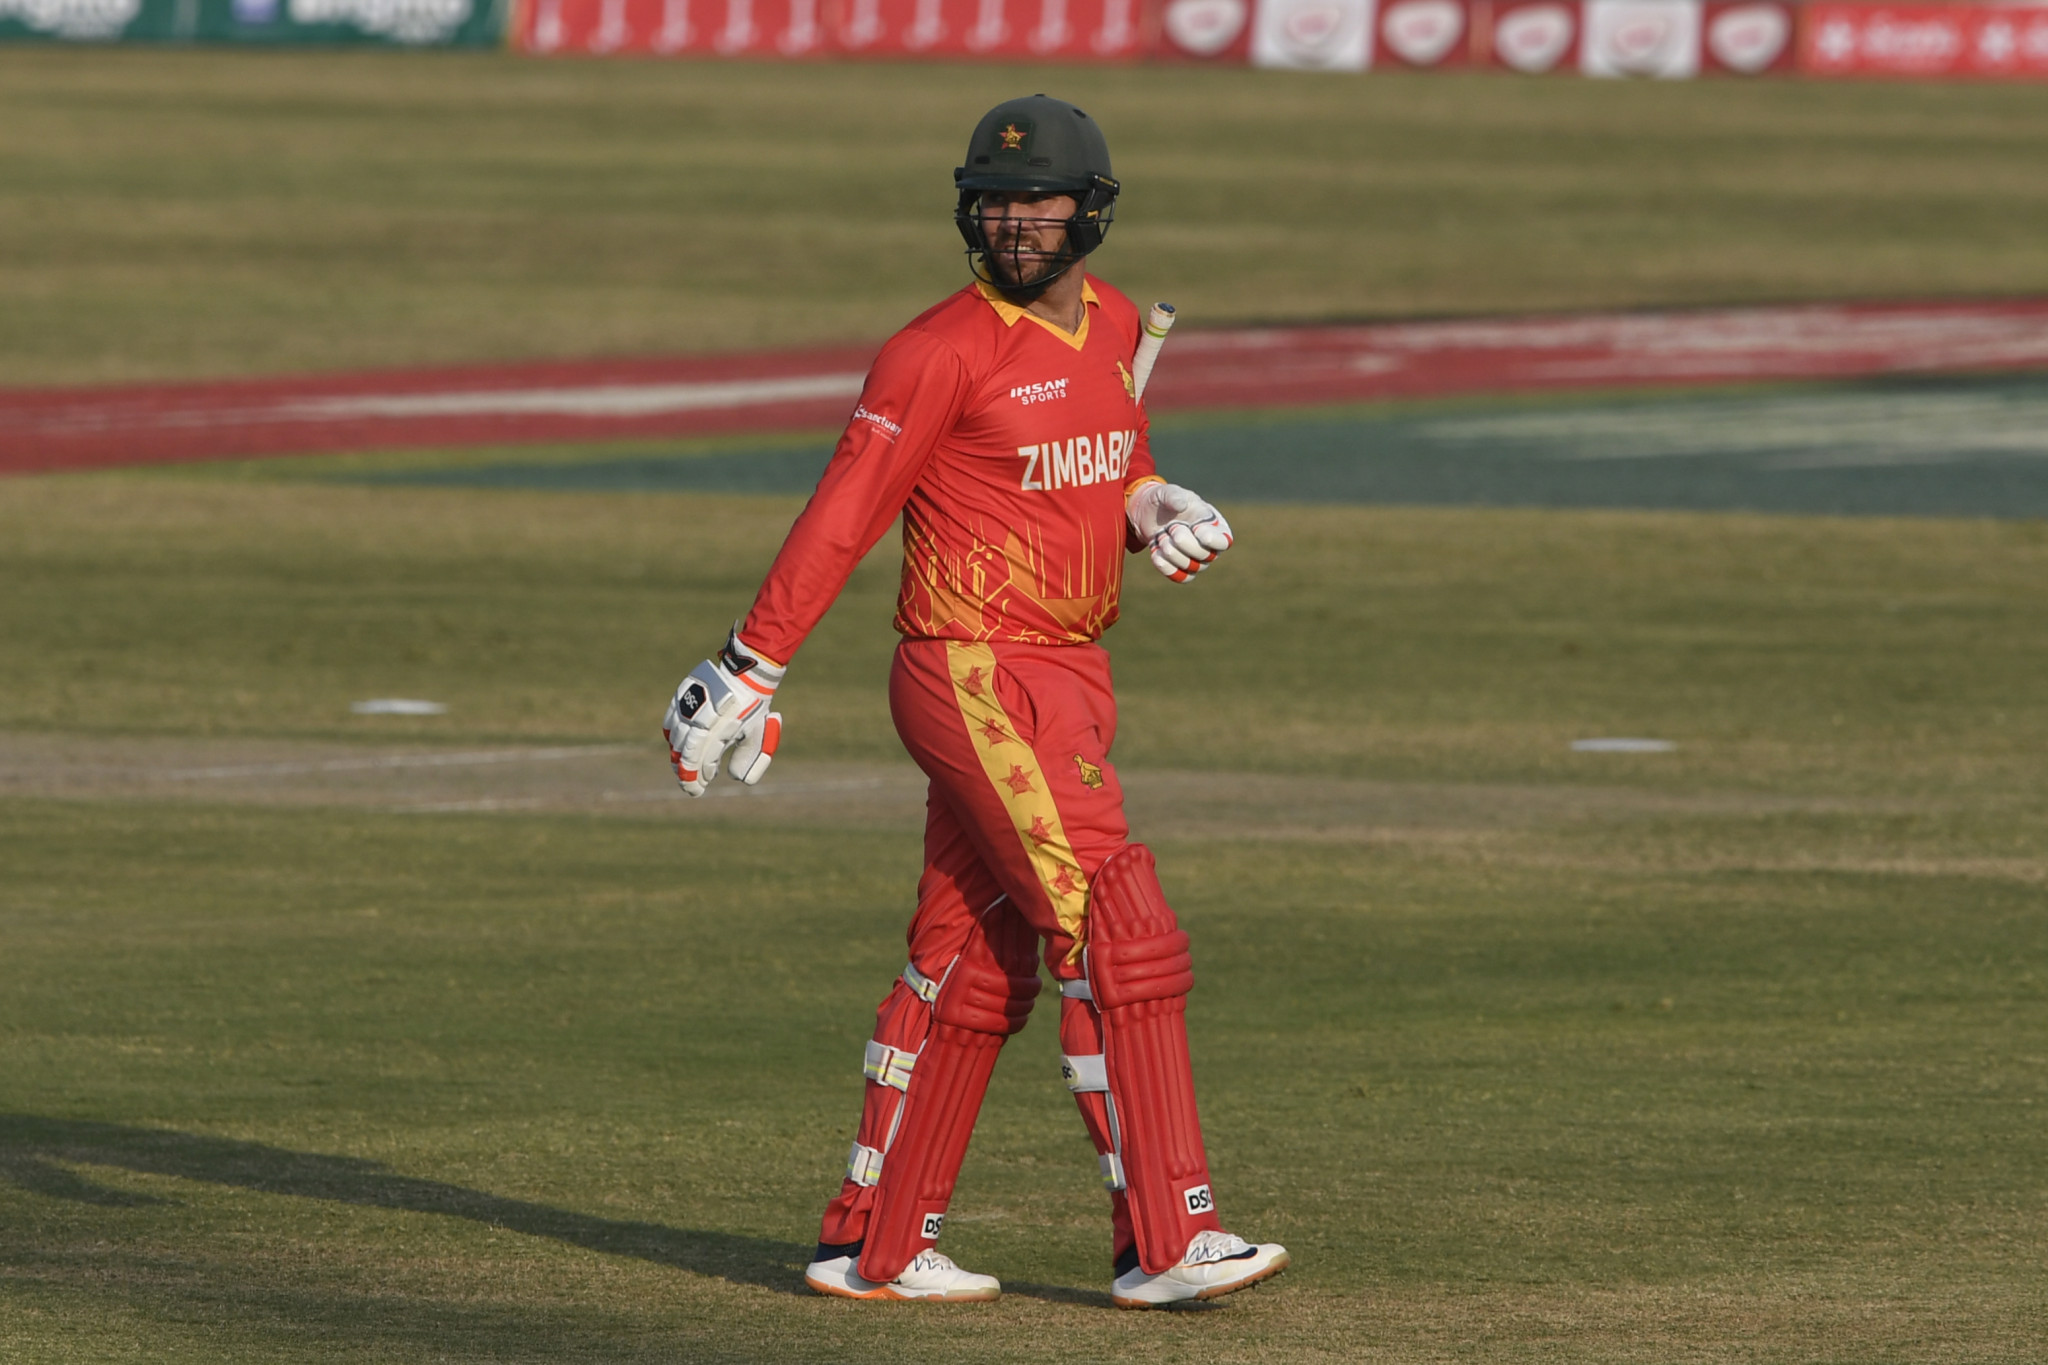 Former Zimbabwe cricket captain claims spot-fixing on cocaine use blackmail